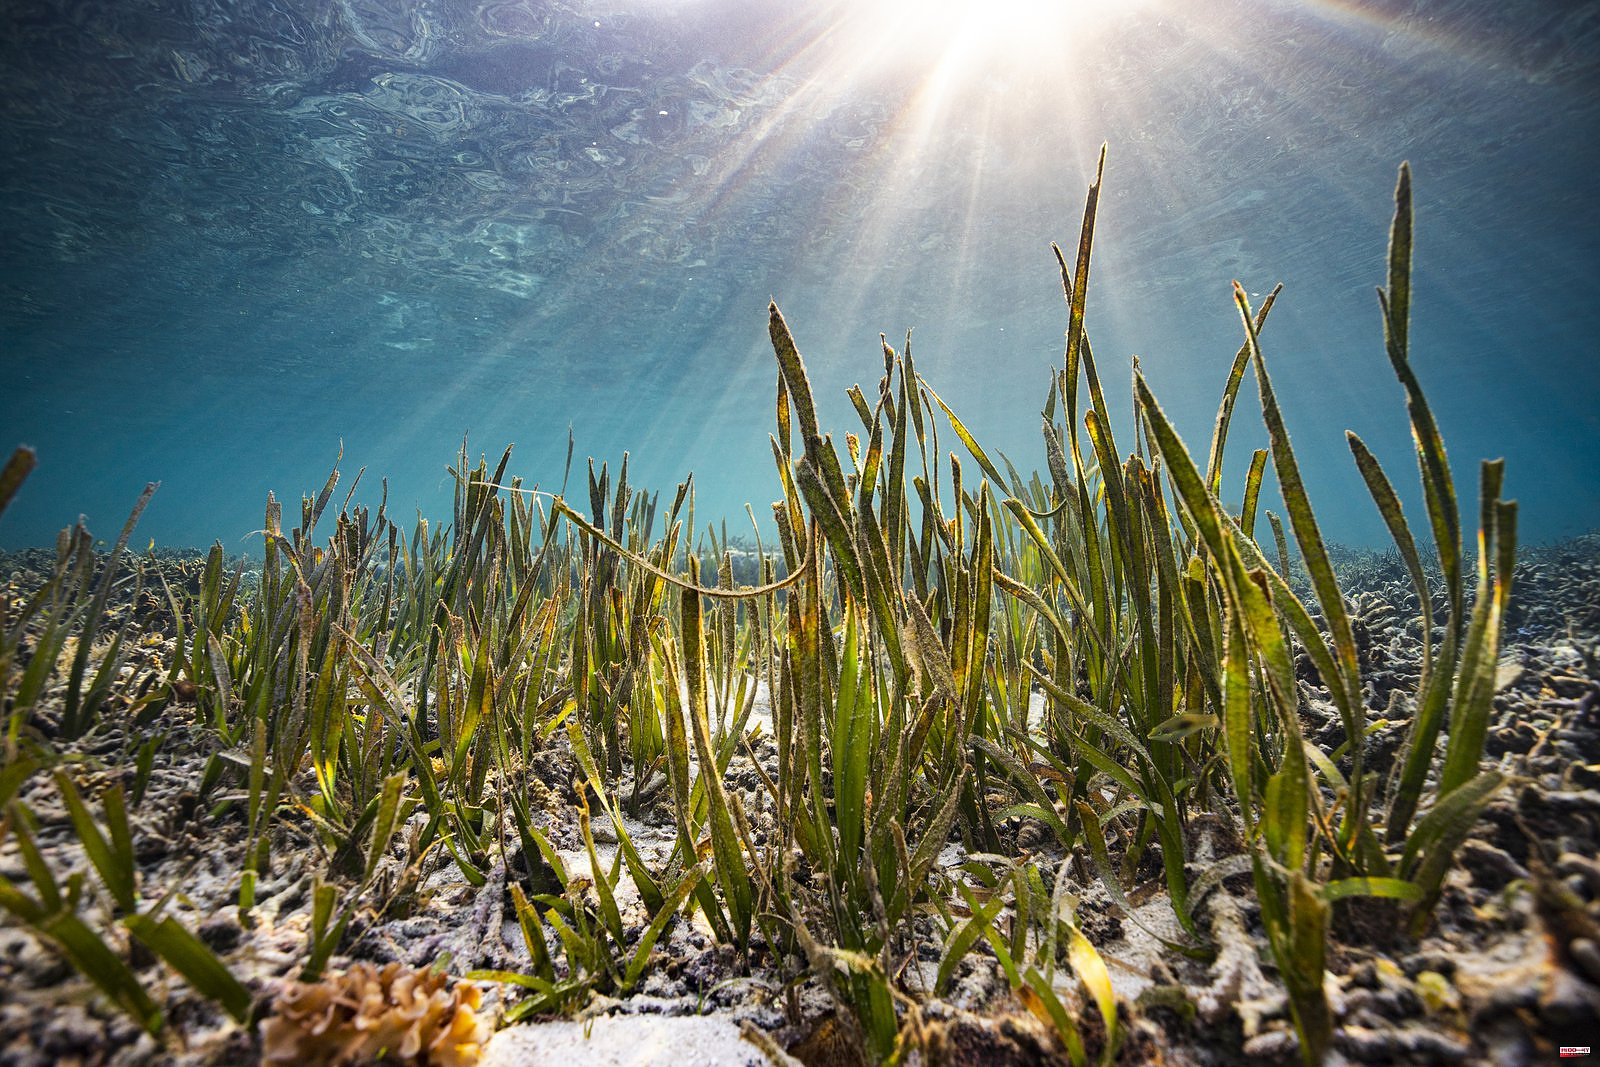 Human pee might just be the key to saving seagrass